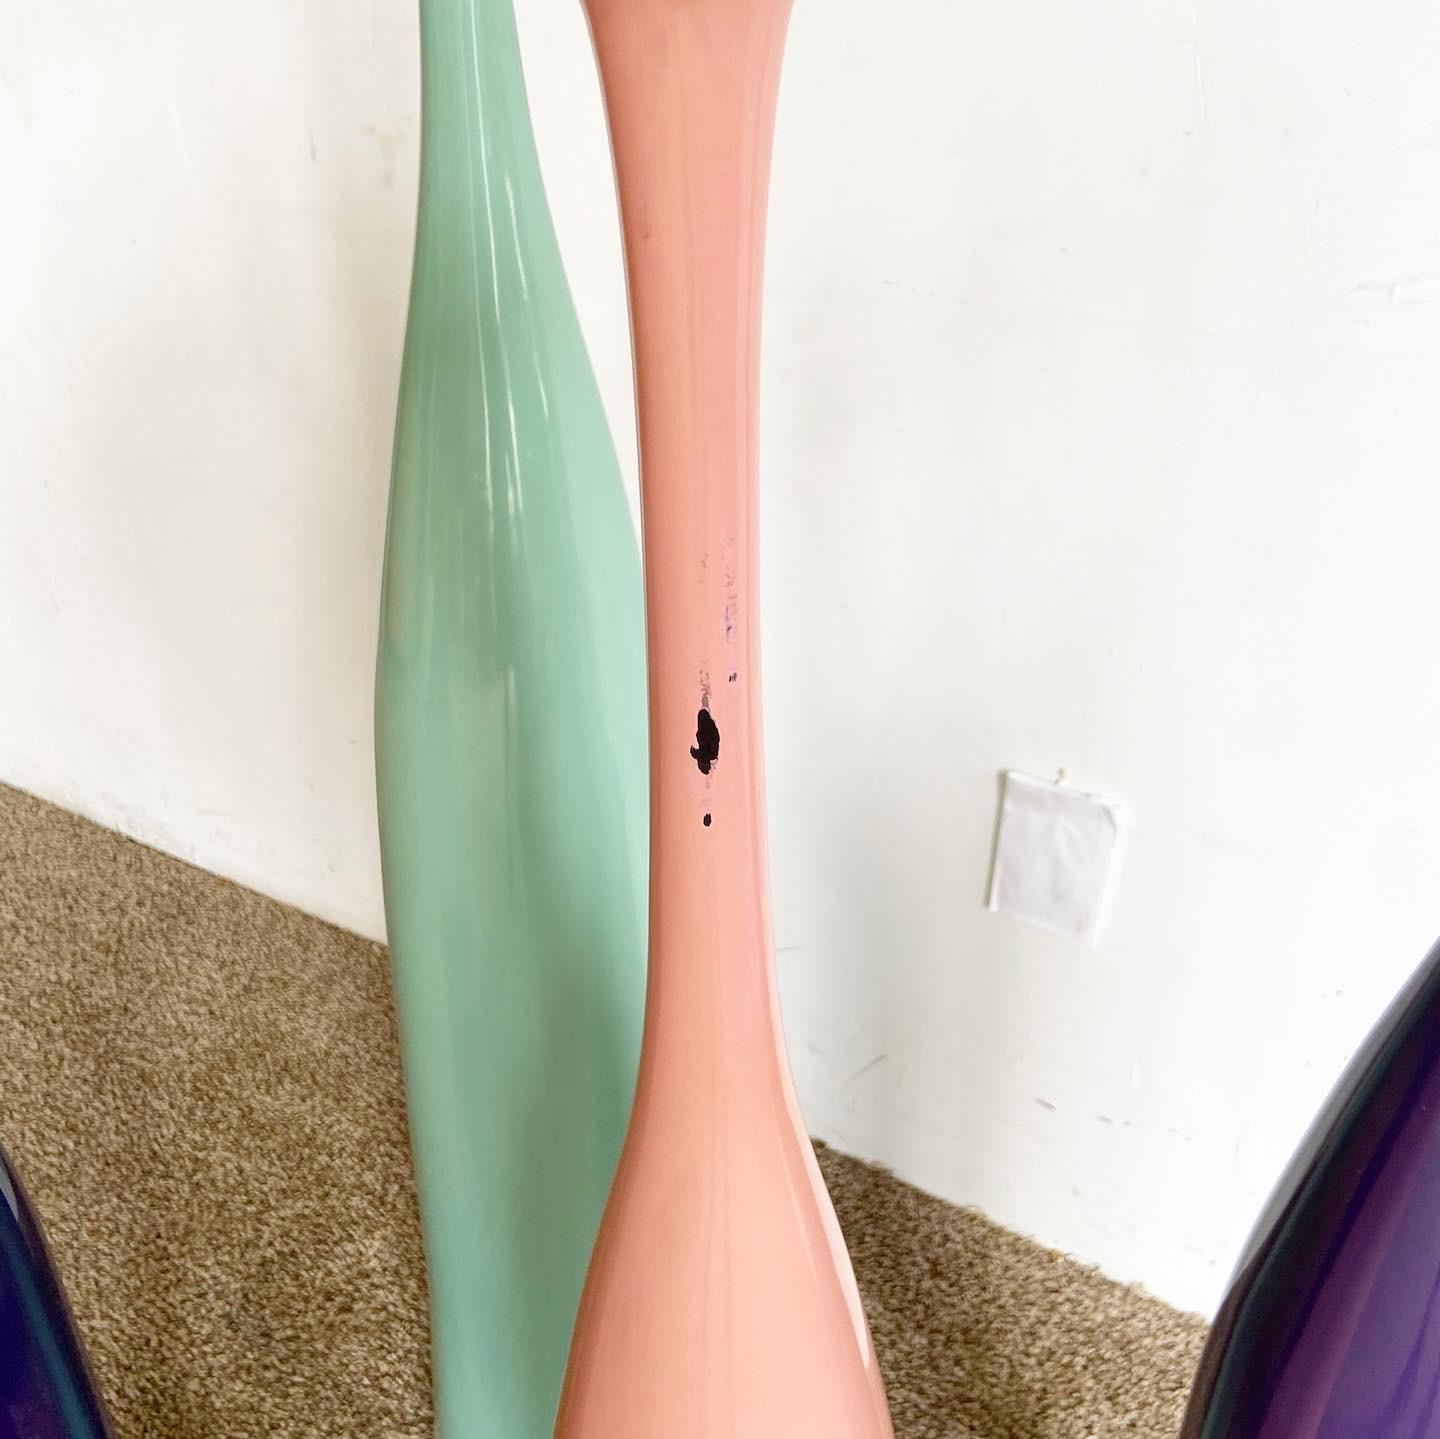 Postmodern Vases by Oggetti in Pink, Purple, and Teal - 6 Pieces In Good Condition For Sale In Delray Beach, FL